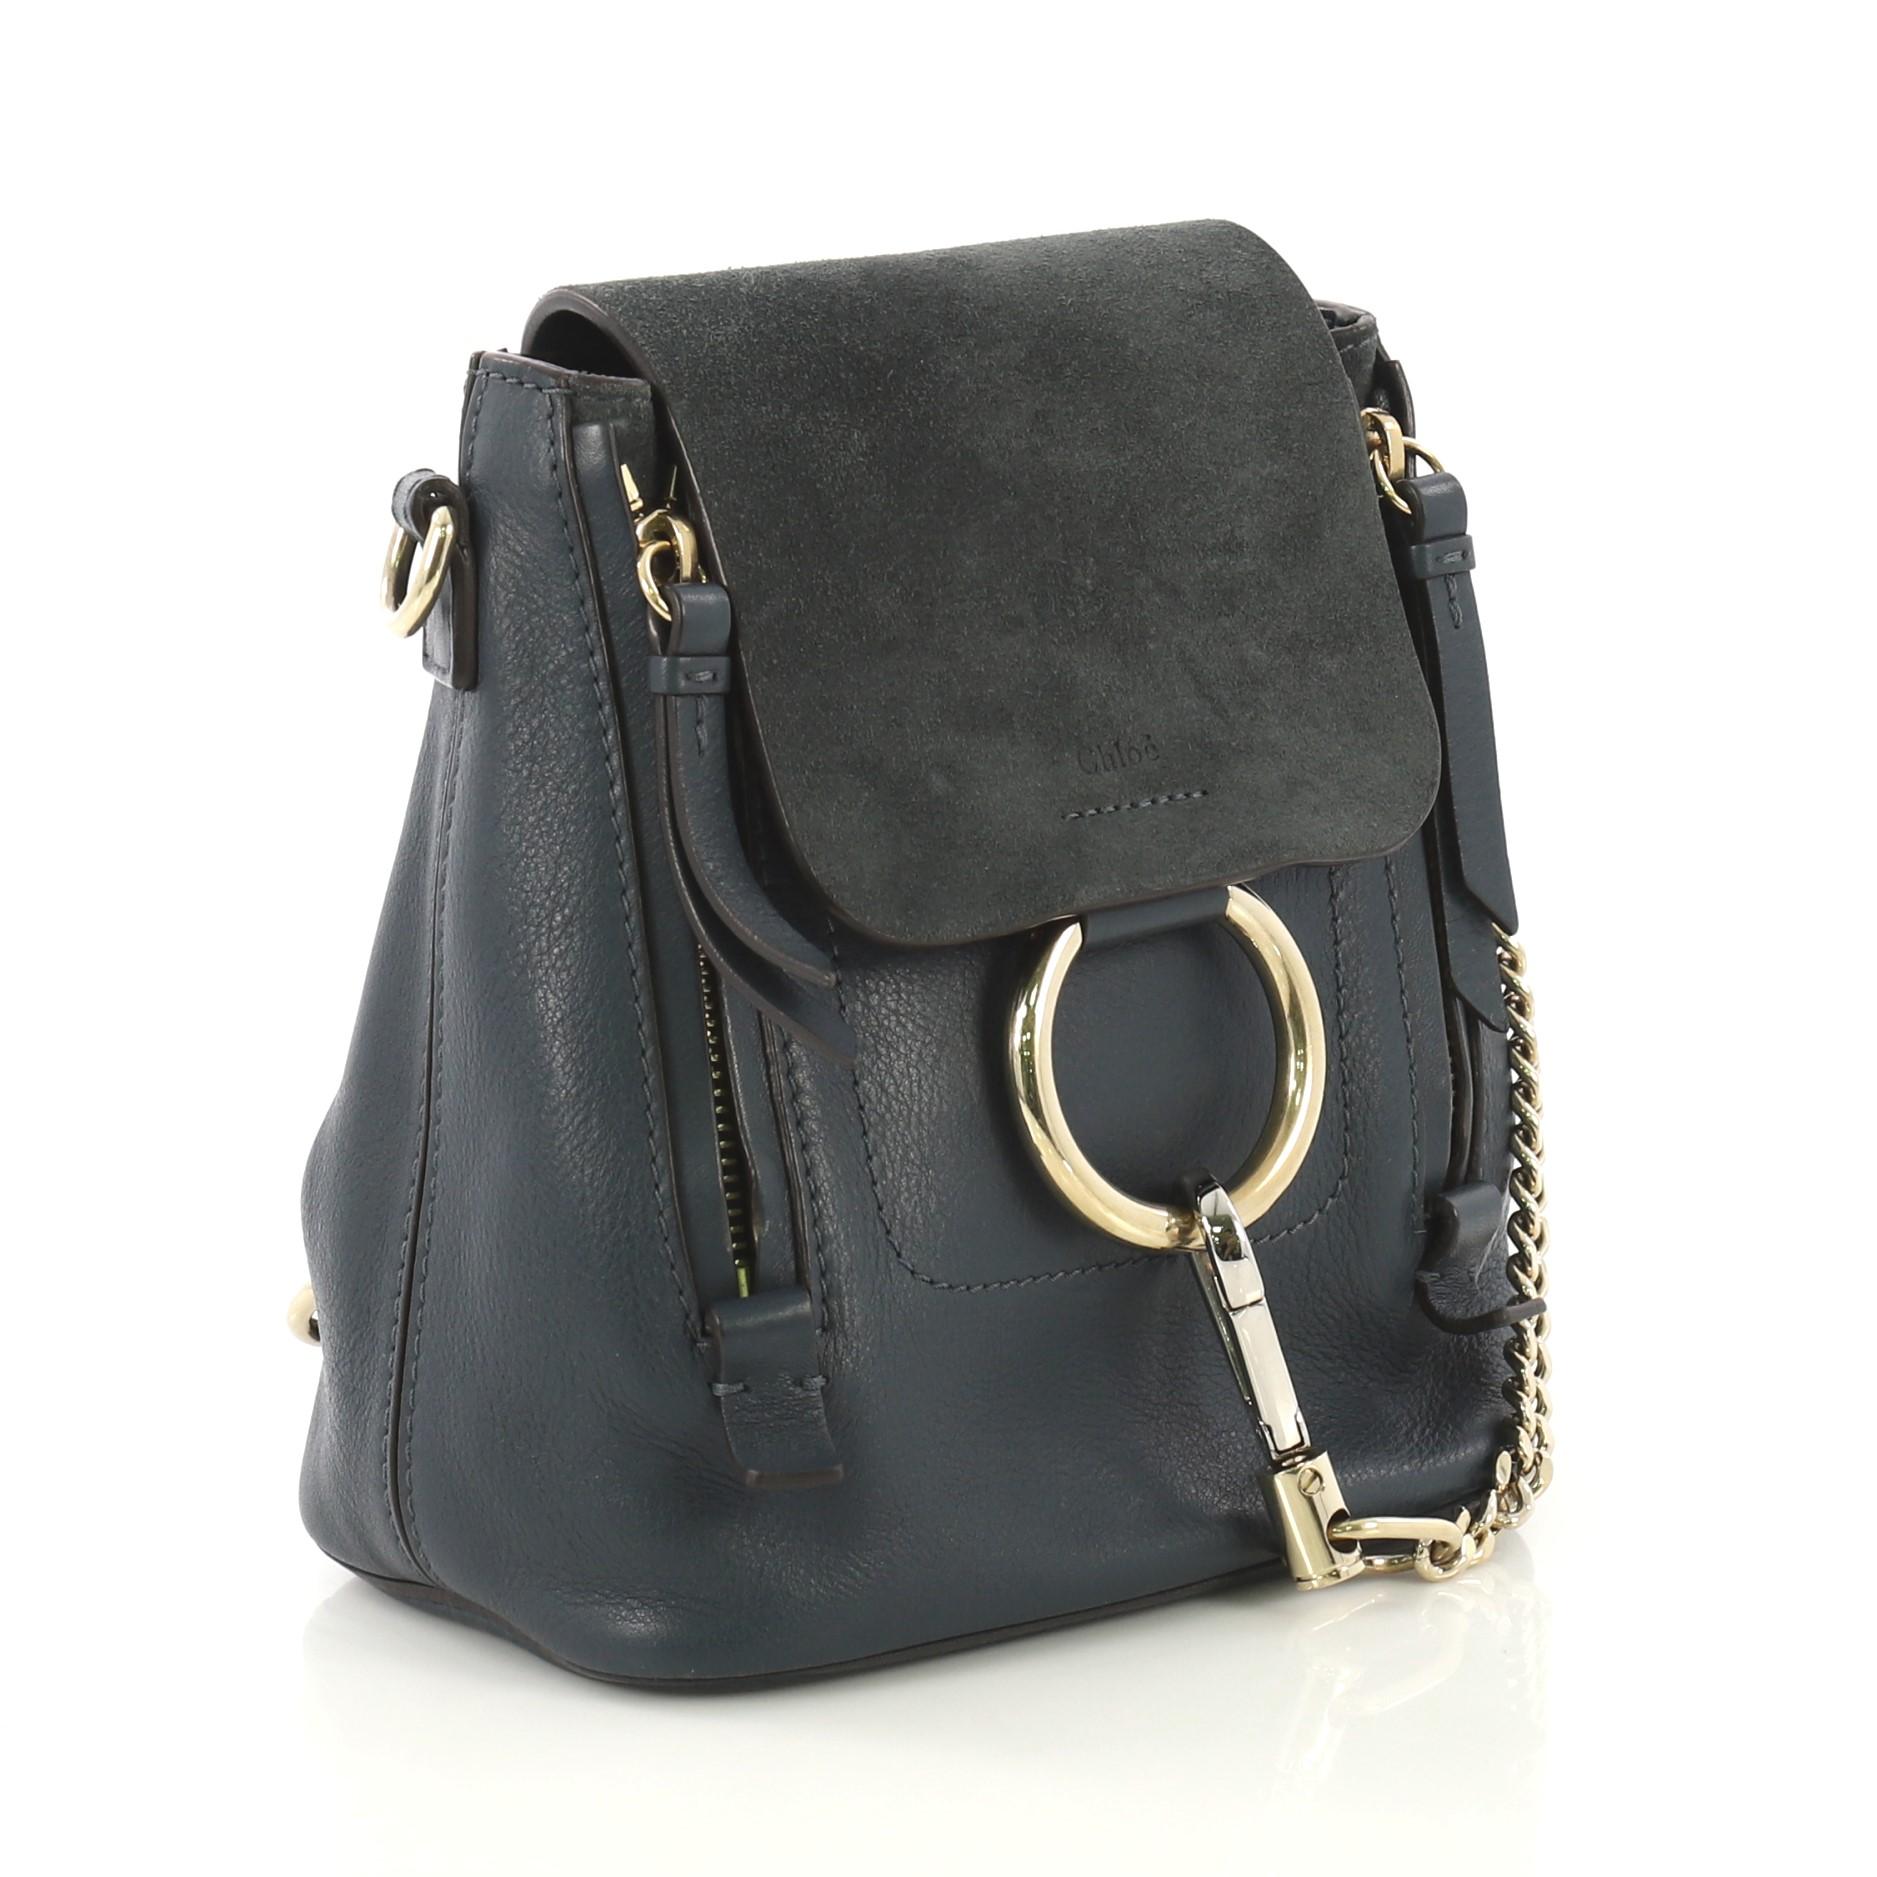 This Chloe Faye Backpack Leather and Suede Mini, crafted from teal leather and suede, features a detachable flat top handle and shoulder strap, flap with chain-clip and ring detail, expandable zip sides, and gold-tone hardware. Its flap opens to a